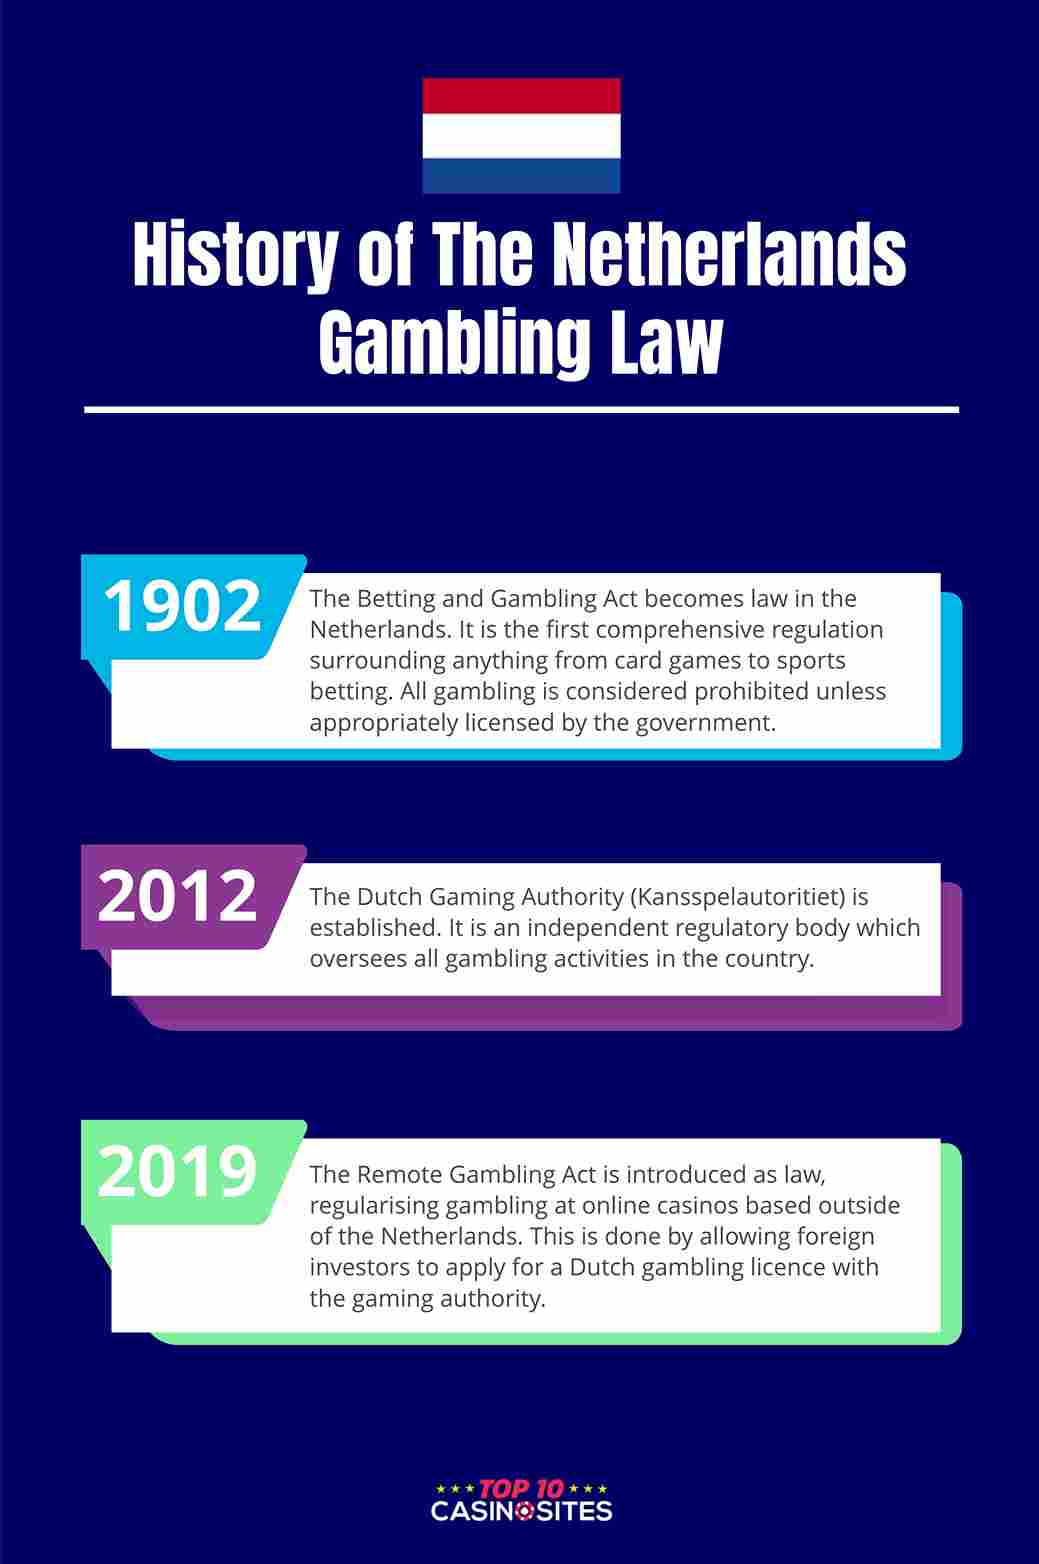 An infographic that outlines the history of gambling laws in the Netherlands.